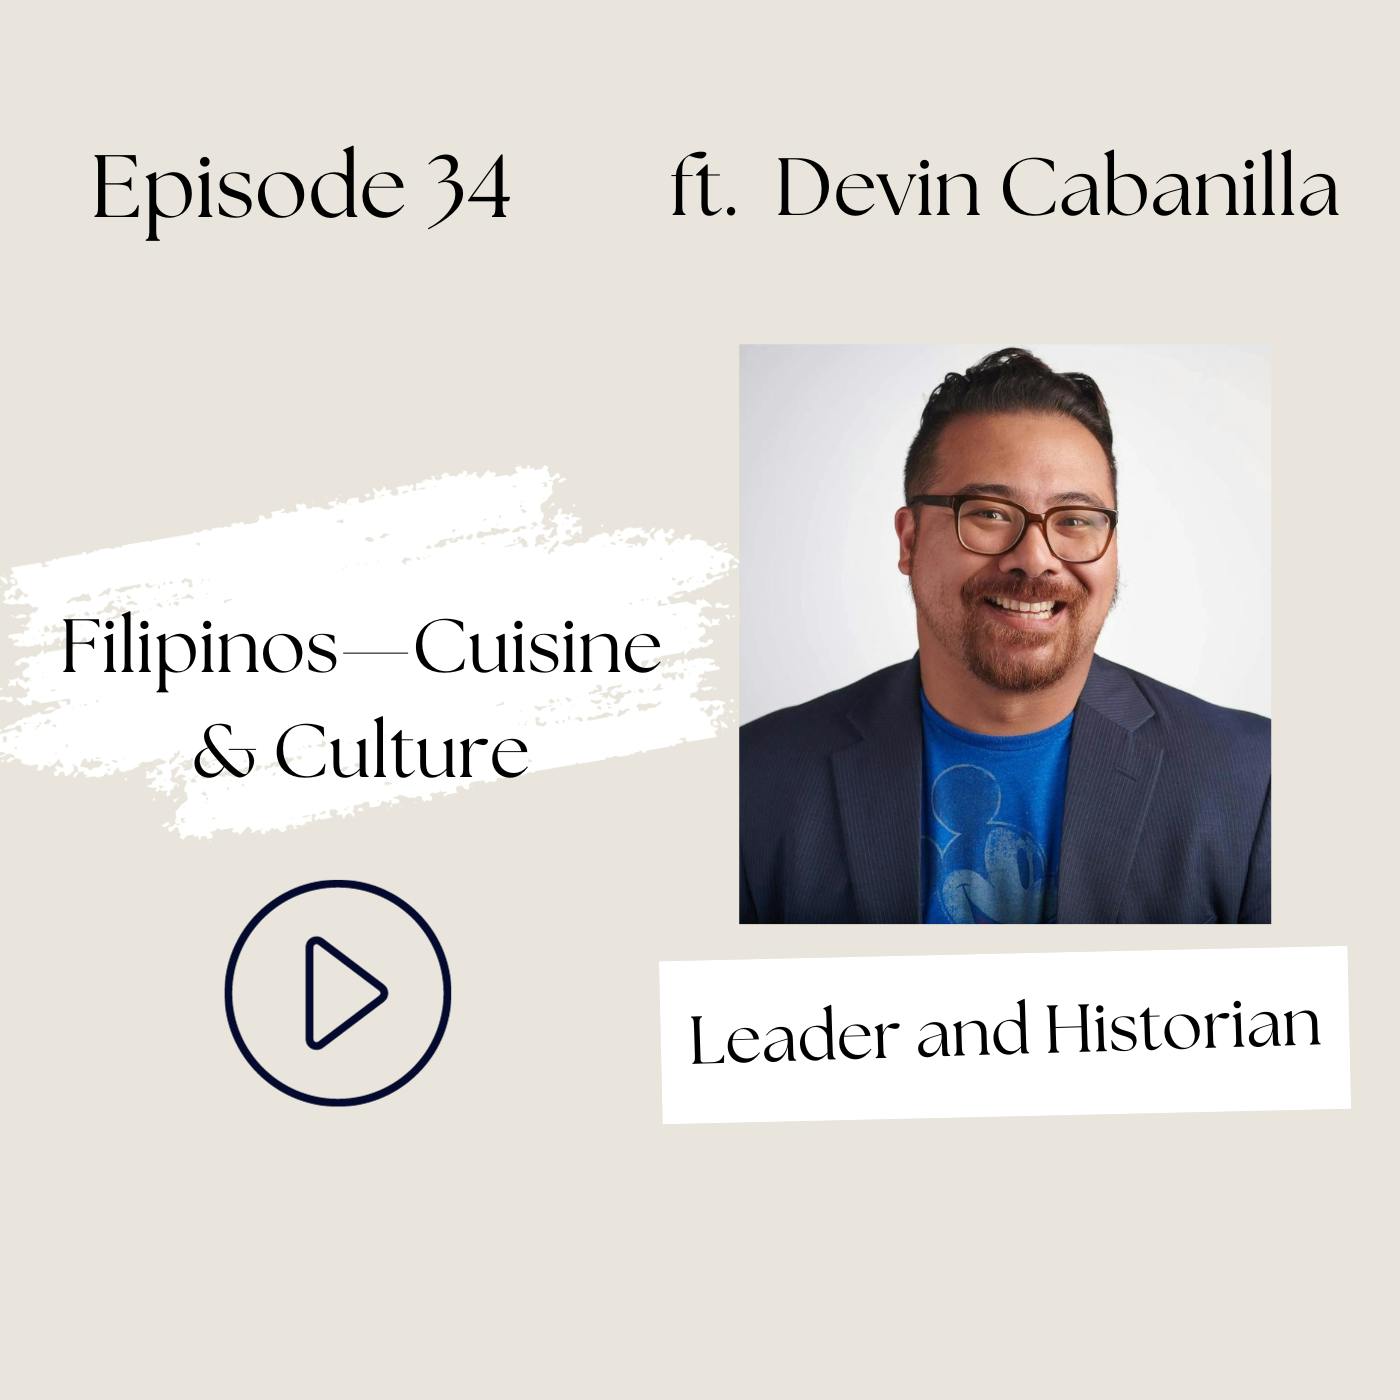 Filipinos— Beyond the Rice Cooker: Cuisine and Cultural Values of the Filipino Community (Devin Cabanilla, Ep 34)